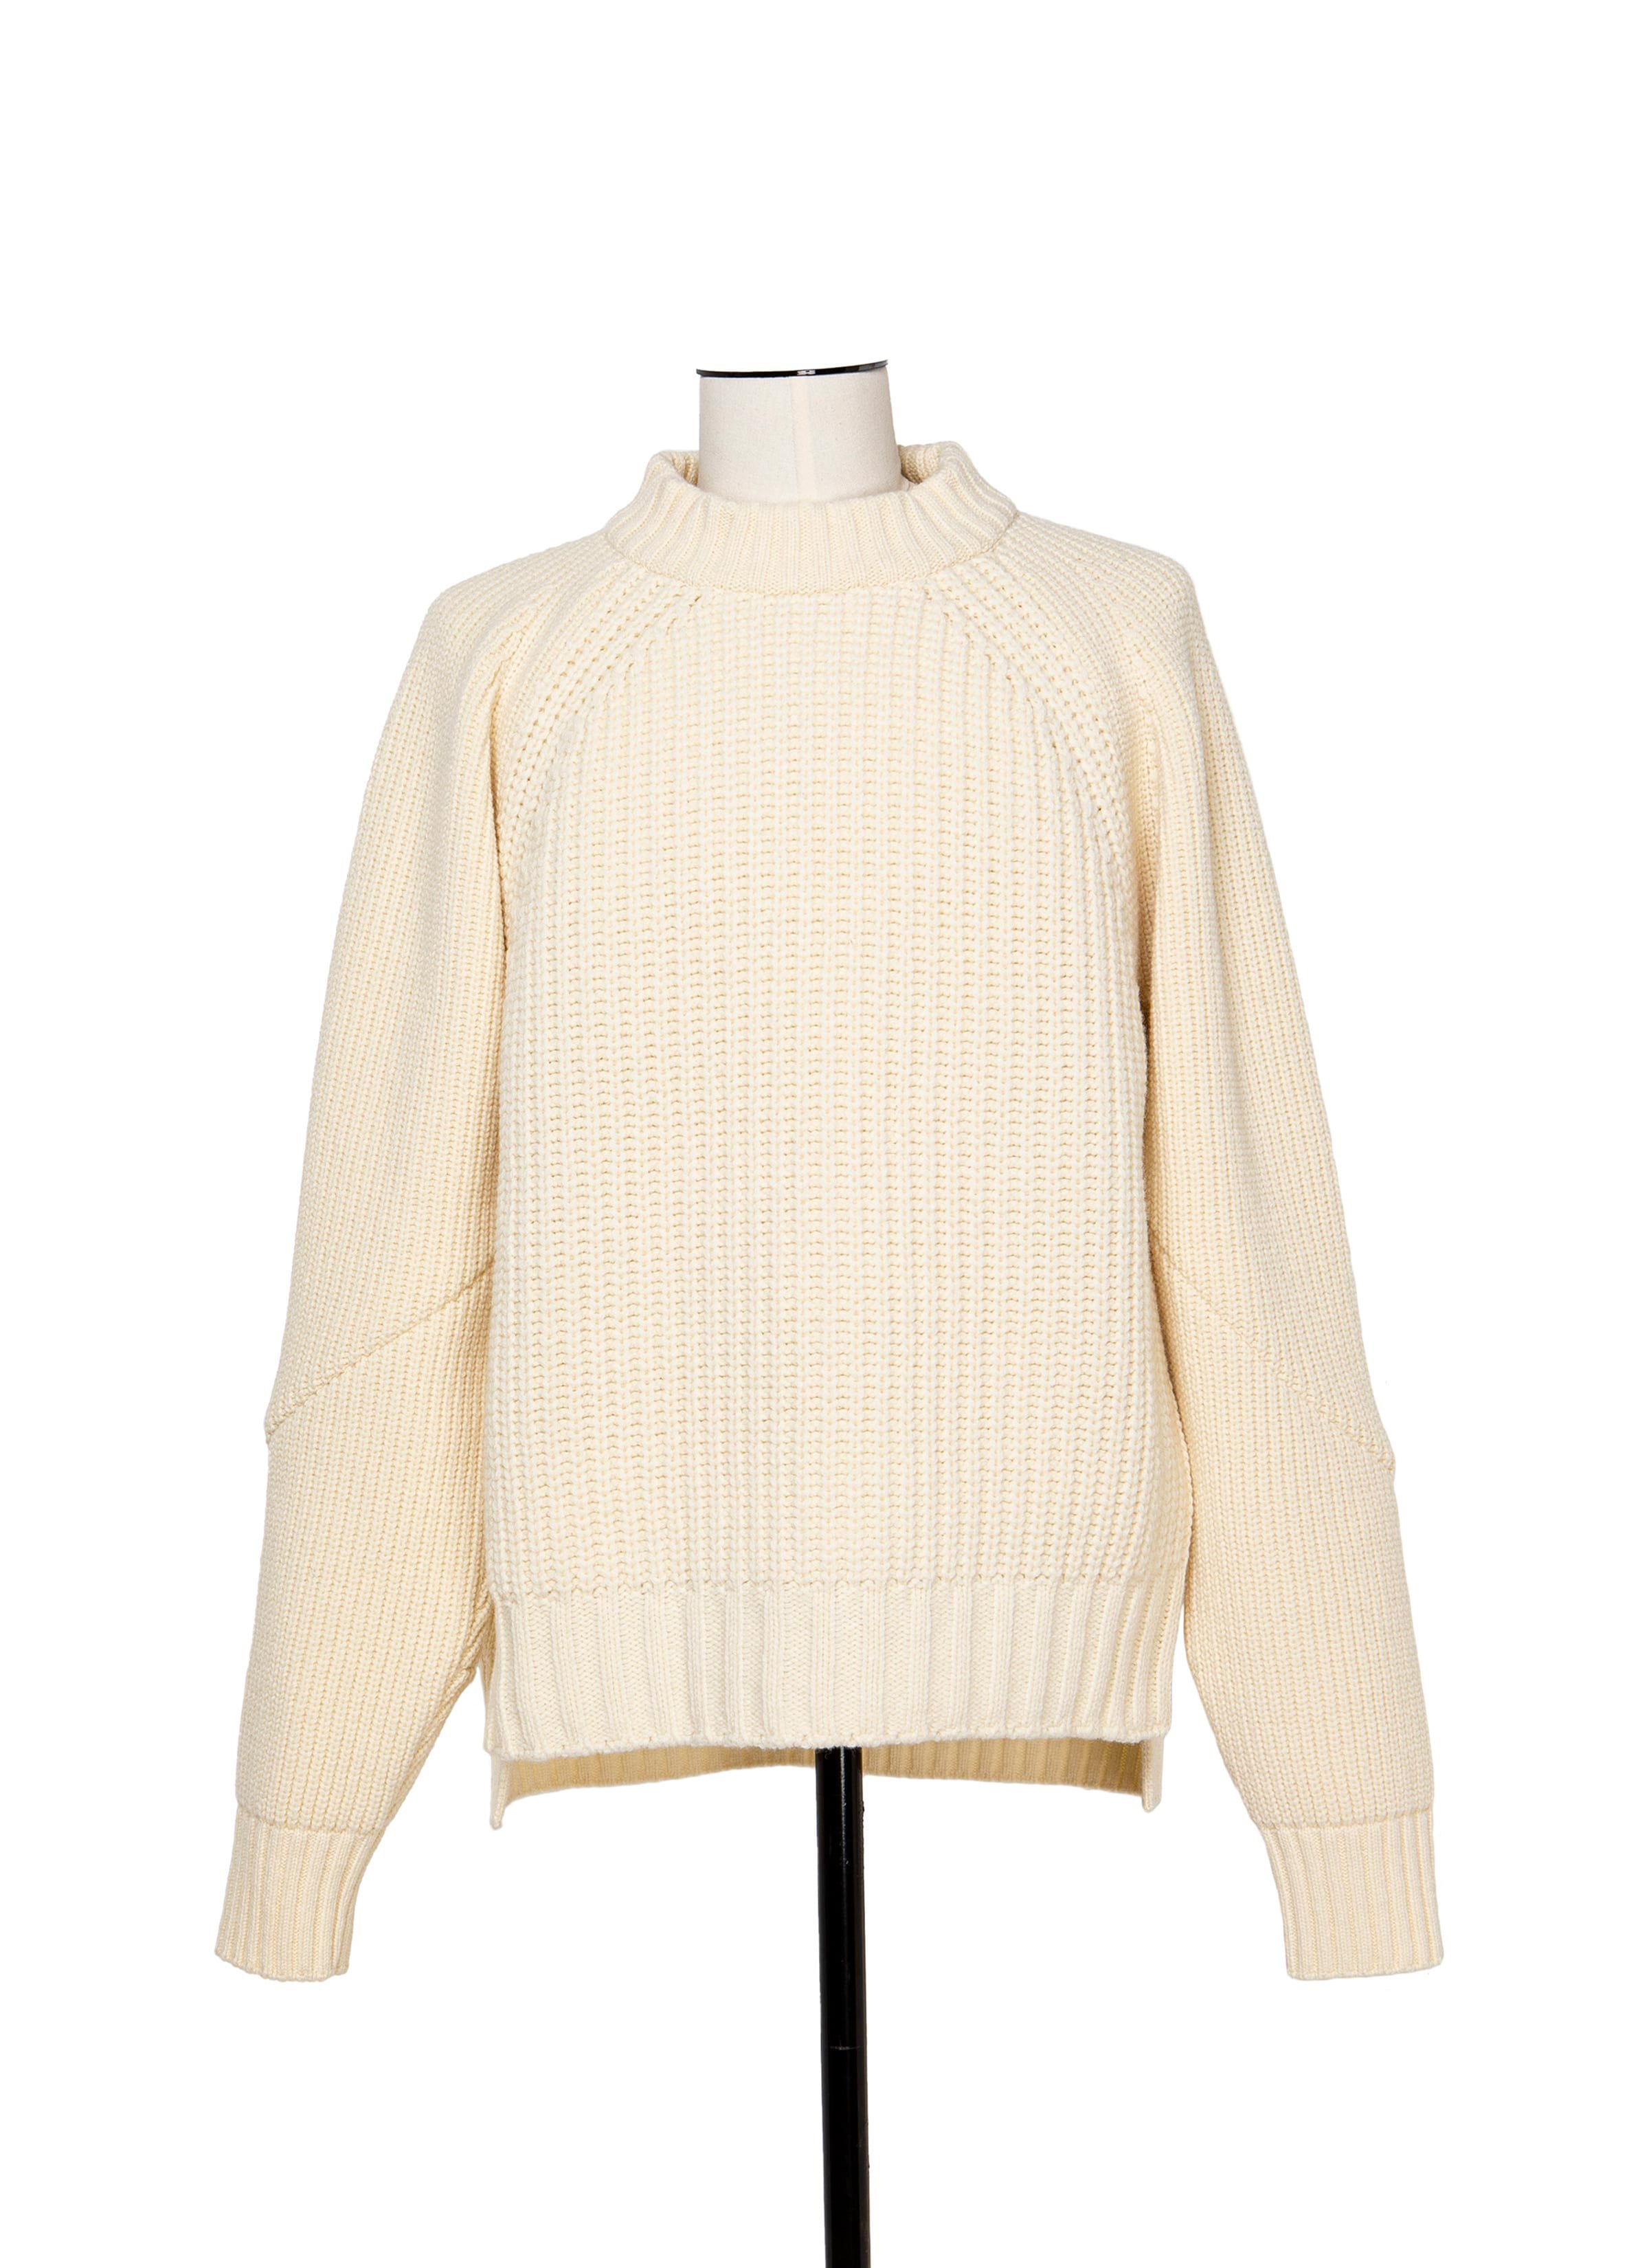 Wool Knit Pullover 詳細画像 OFF WHITE 2